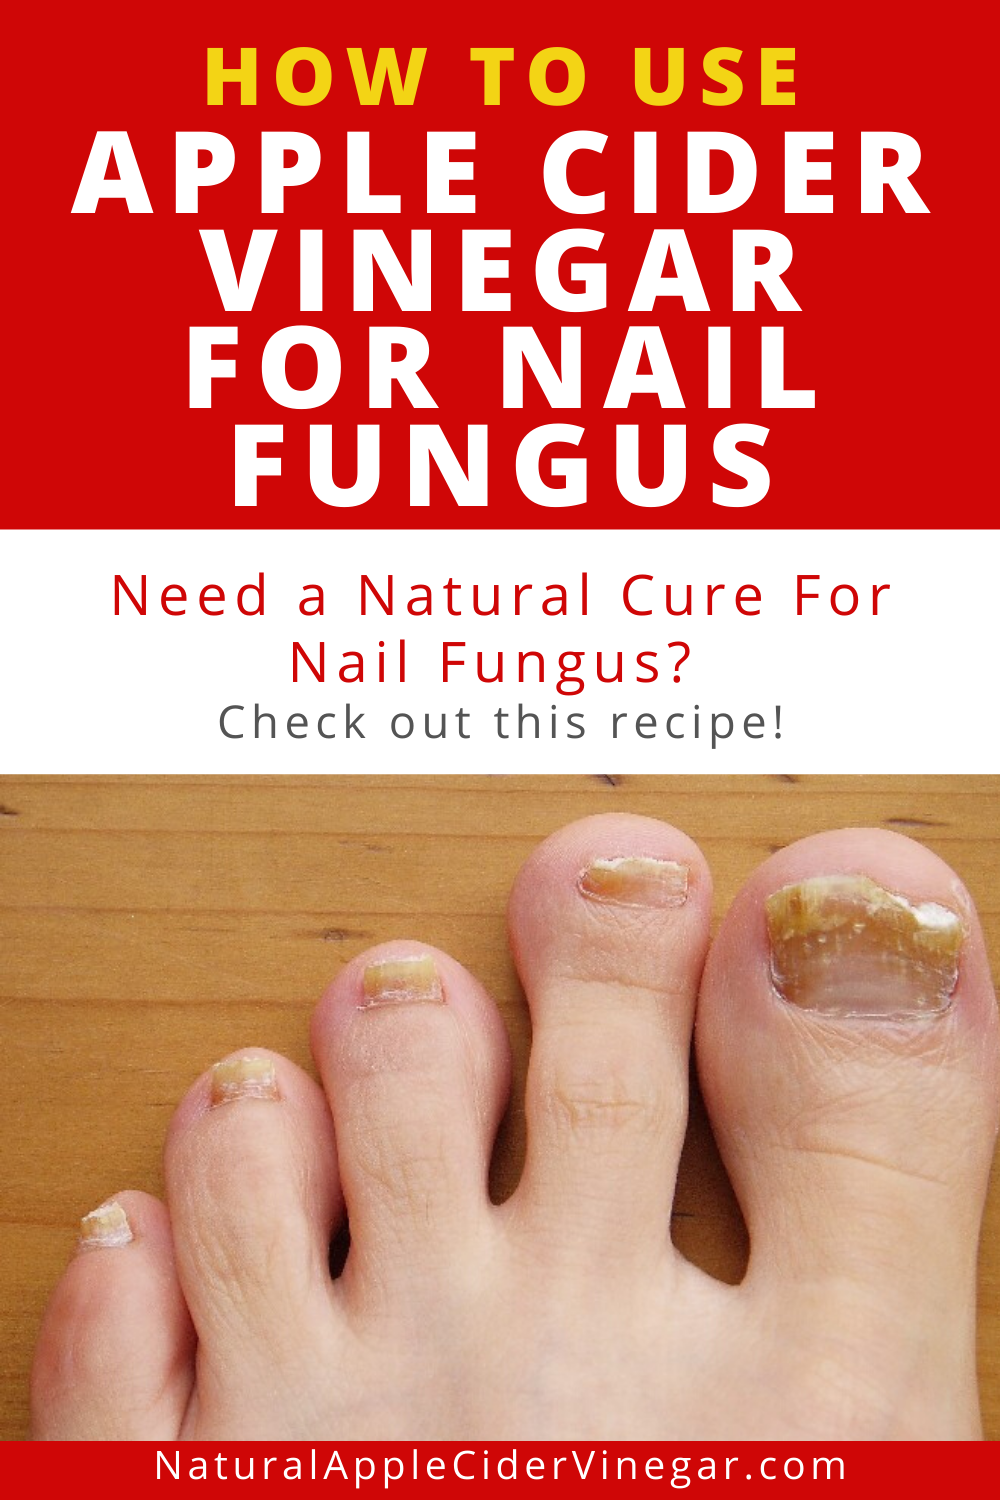 How to Use Apple Cider Vinegar for Nail Fungus